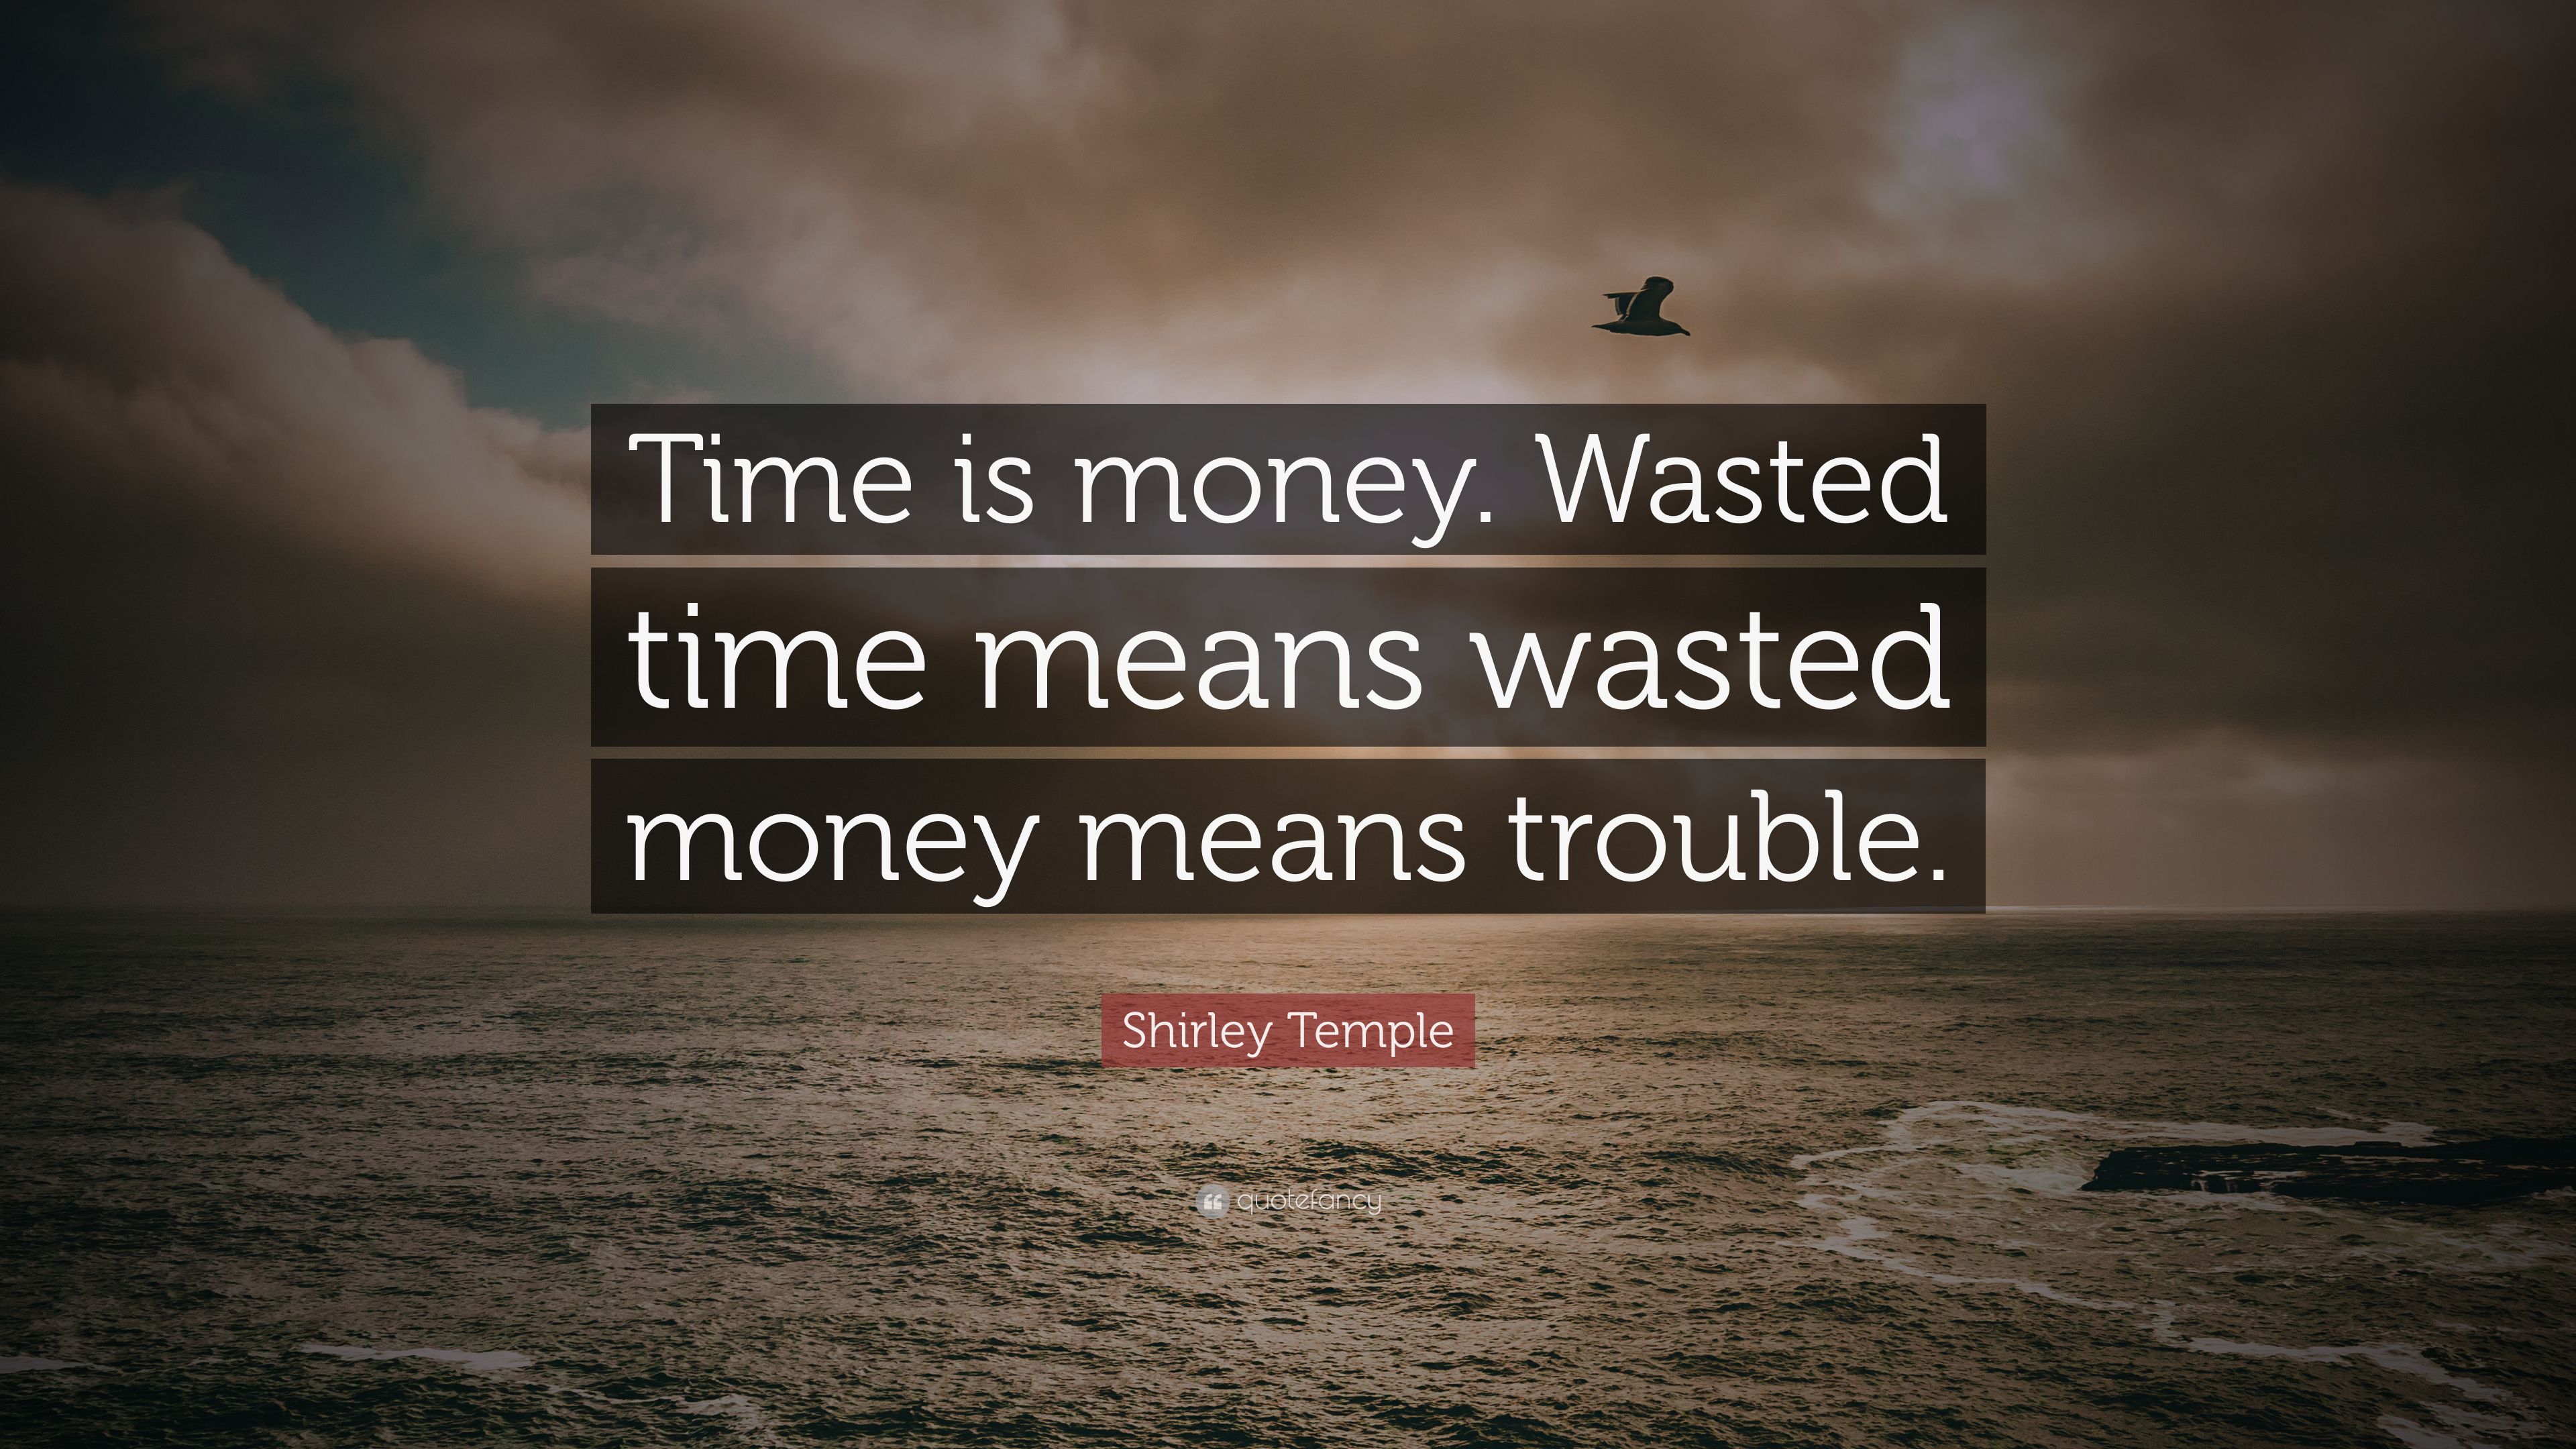 Shirley Temple Quote: “Time is money. Wasted time means wasted money means trouble.” (7 wallpaper)